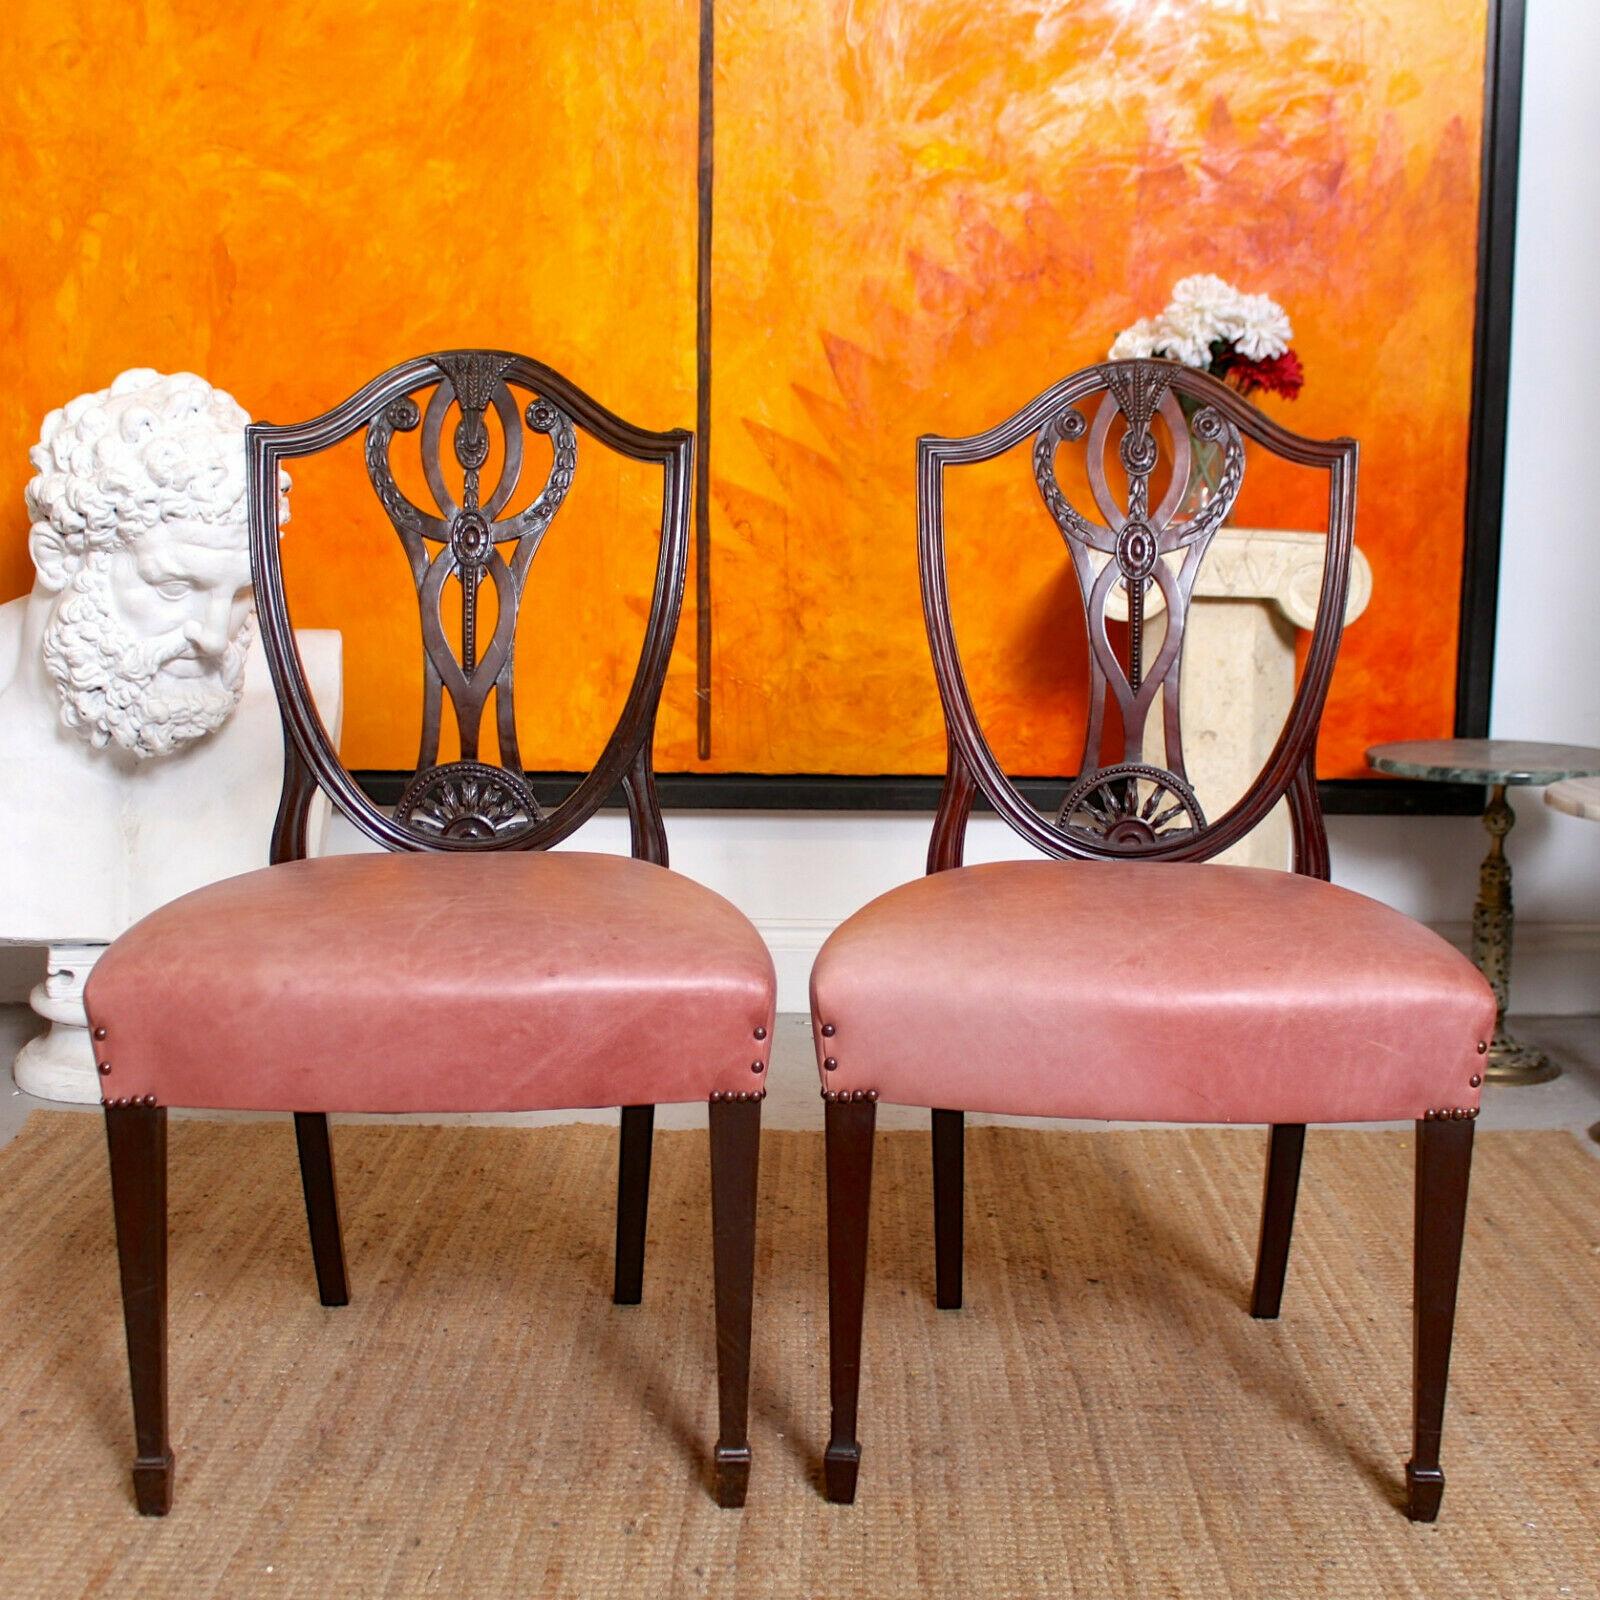 6 English Dining Chairs Hepplewhite Mahogany Leather, 19th Century For Sale 4